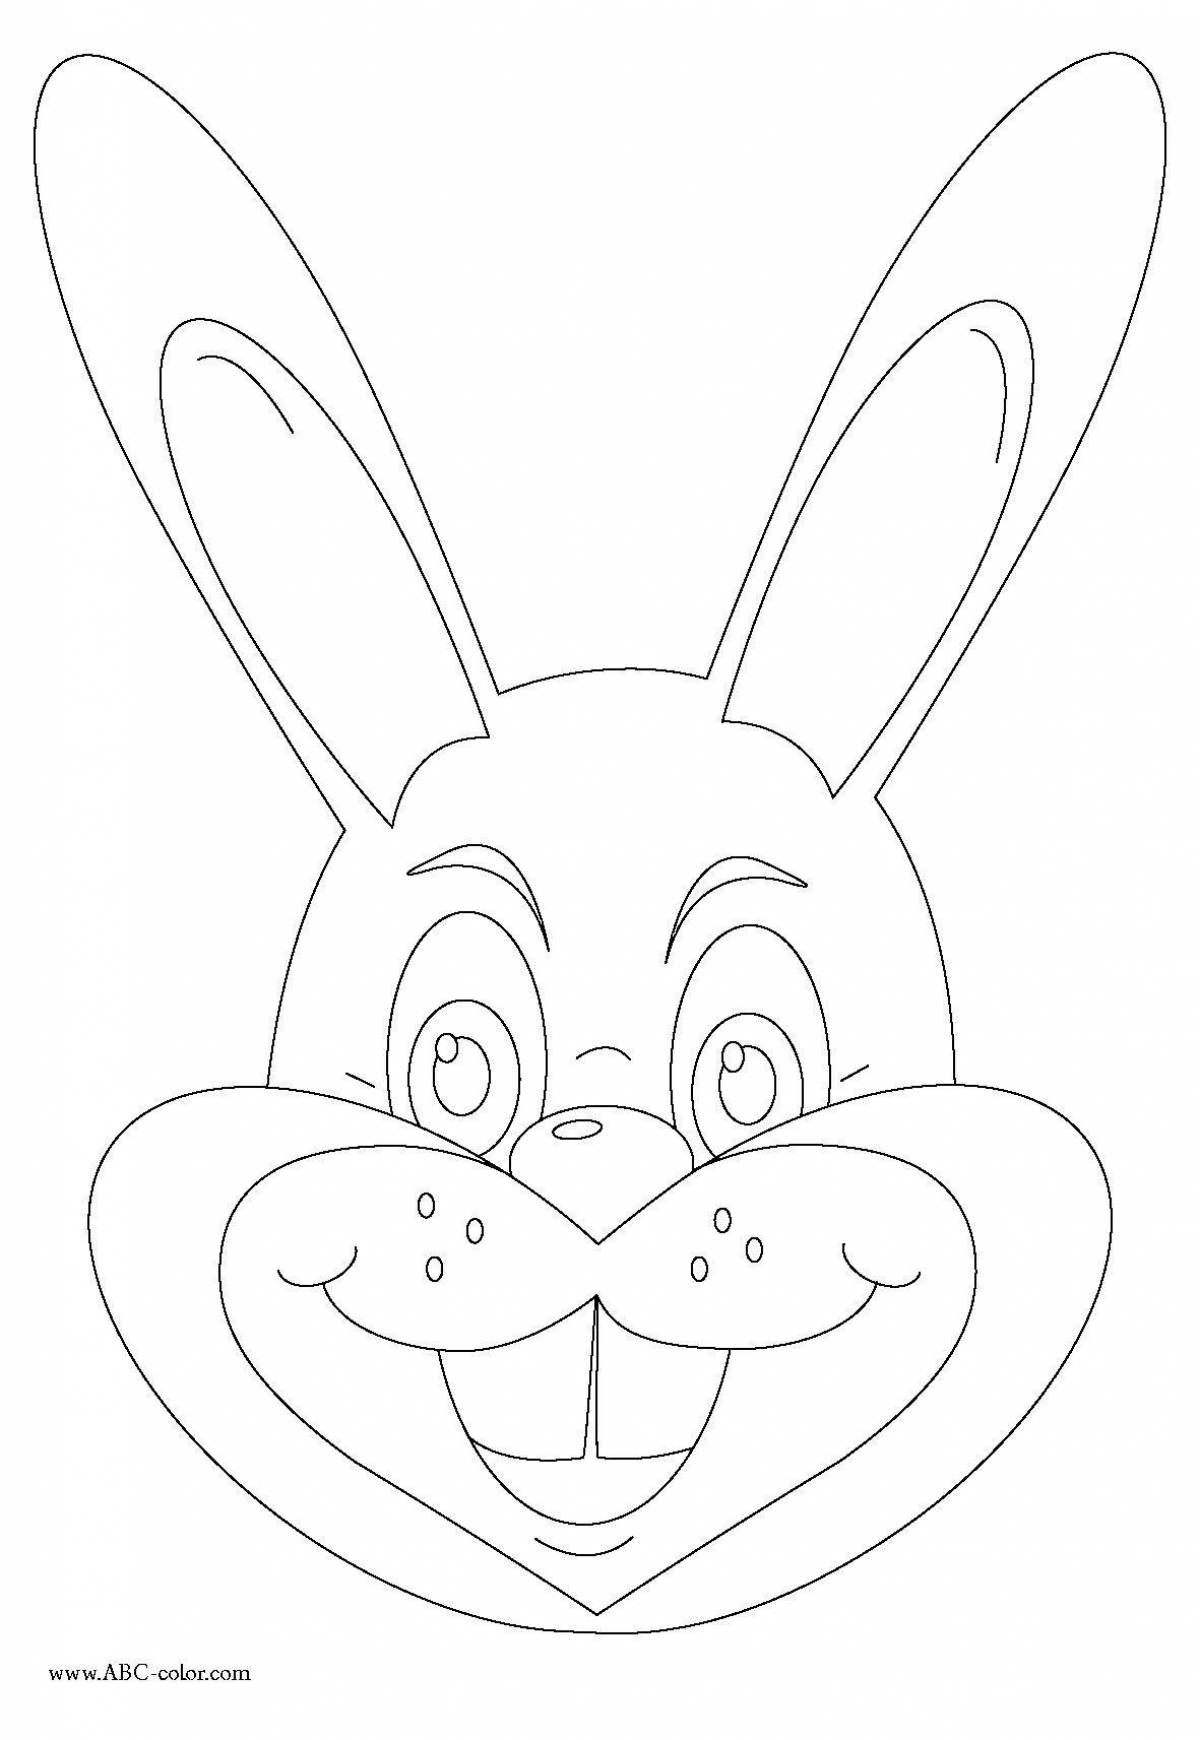 Coloring page of a cheerful hare